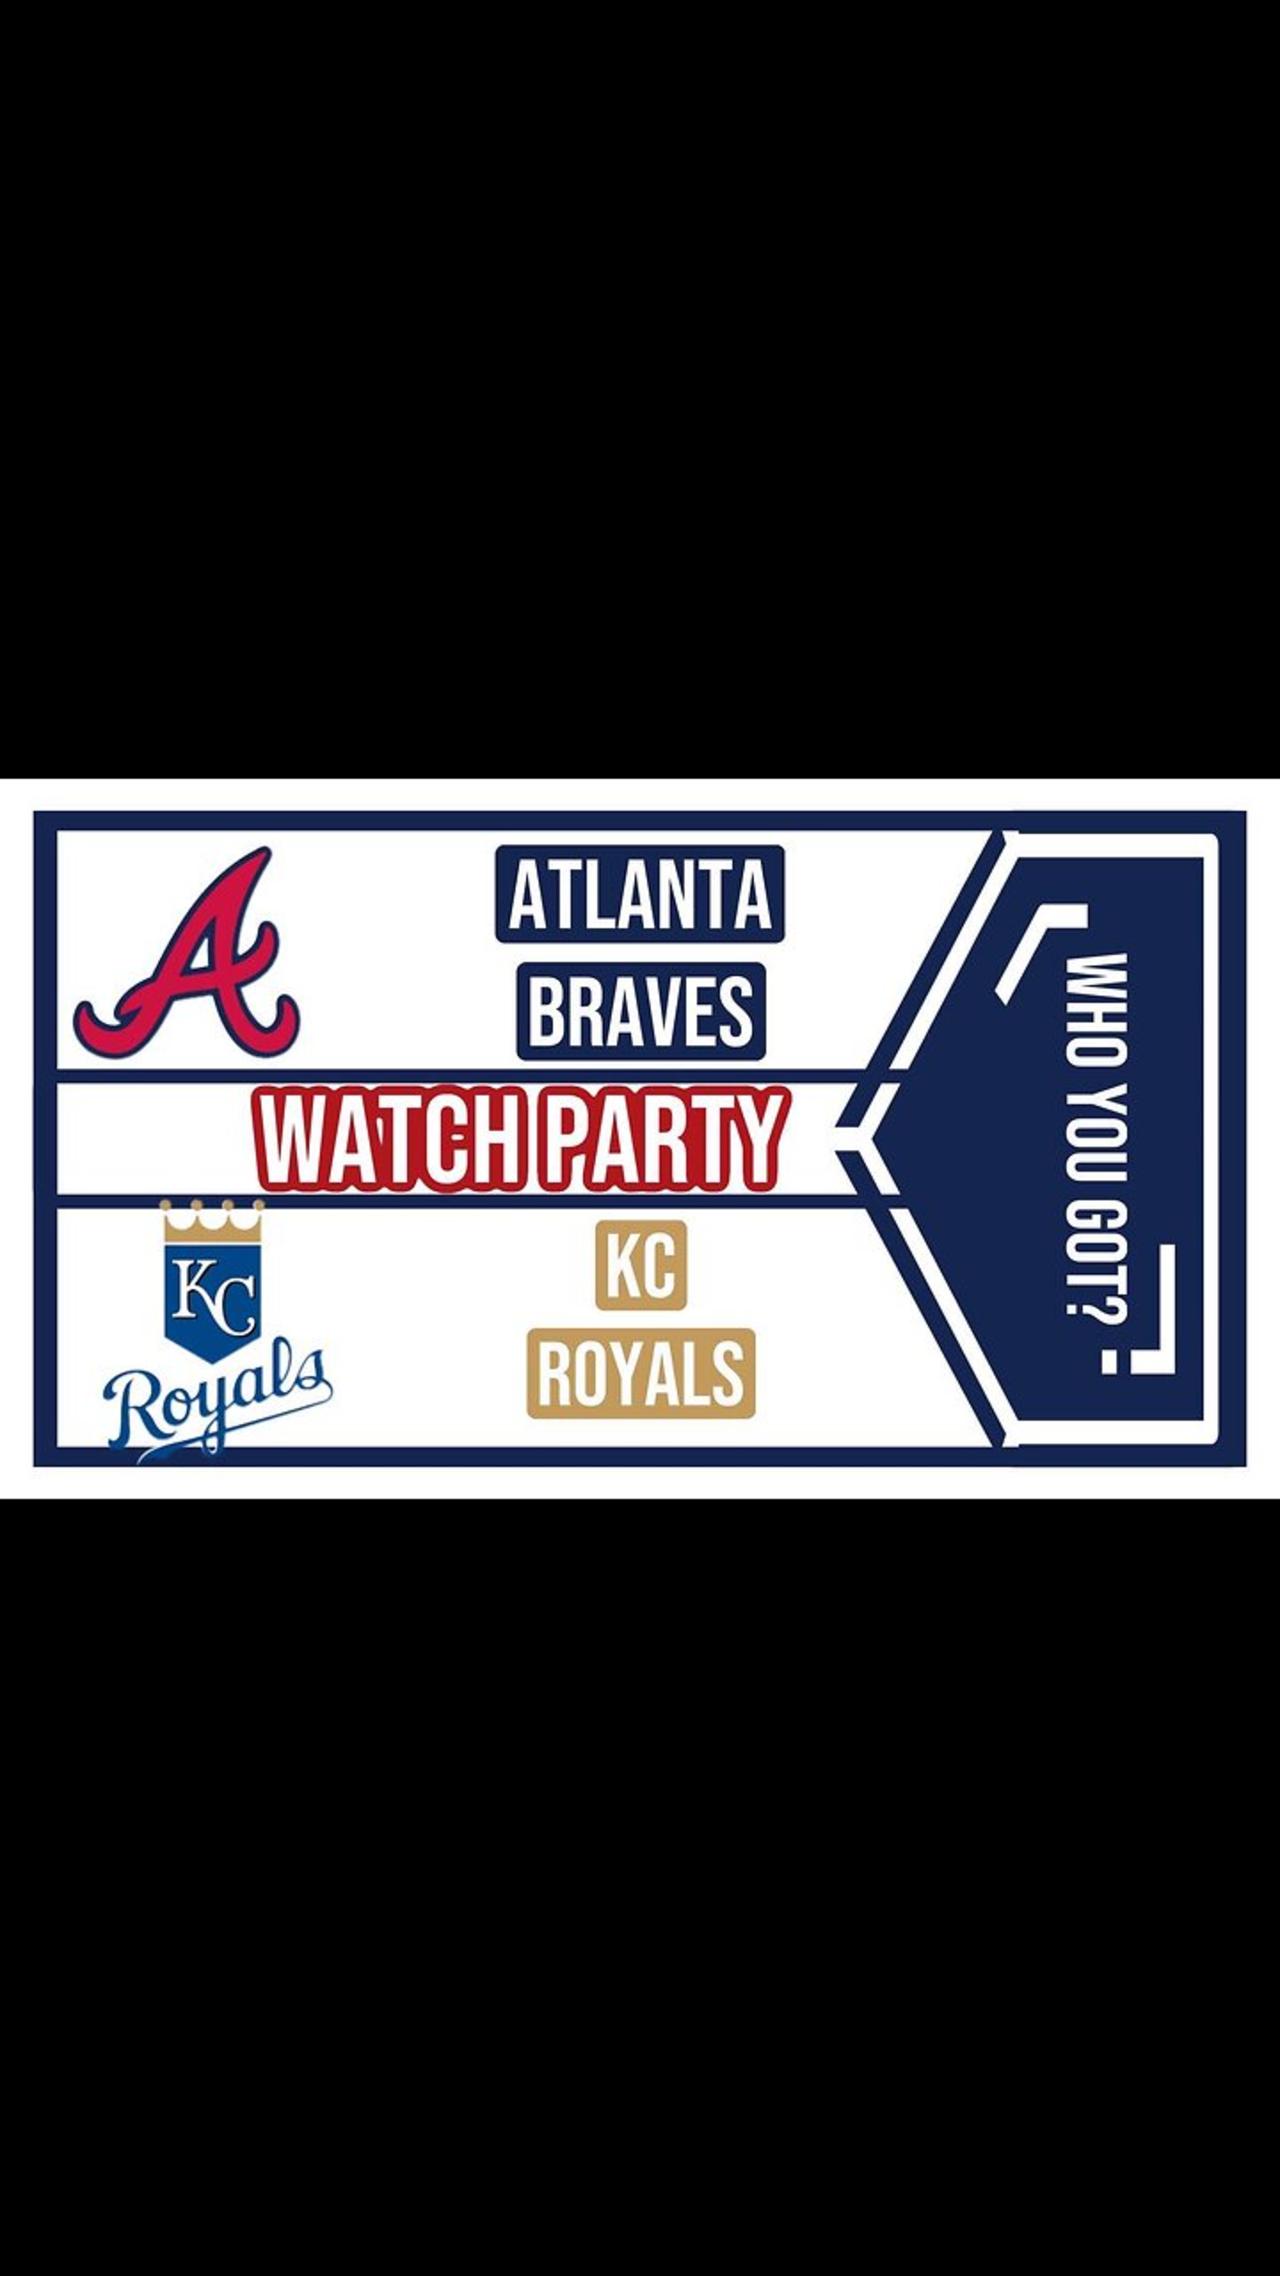 Join The Excitement: Atlanta Braves vs Kansas City Royals Live Watch Party